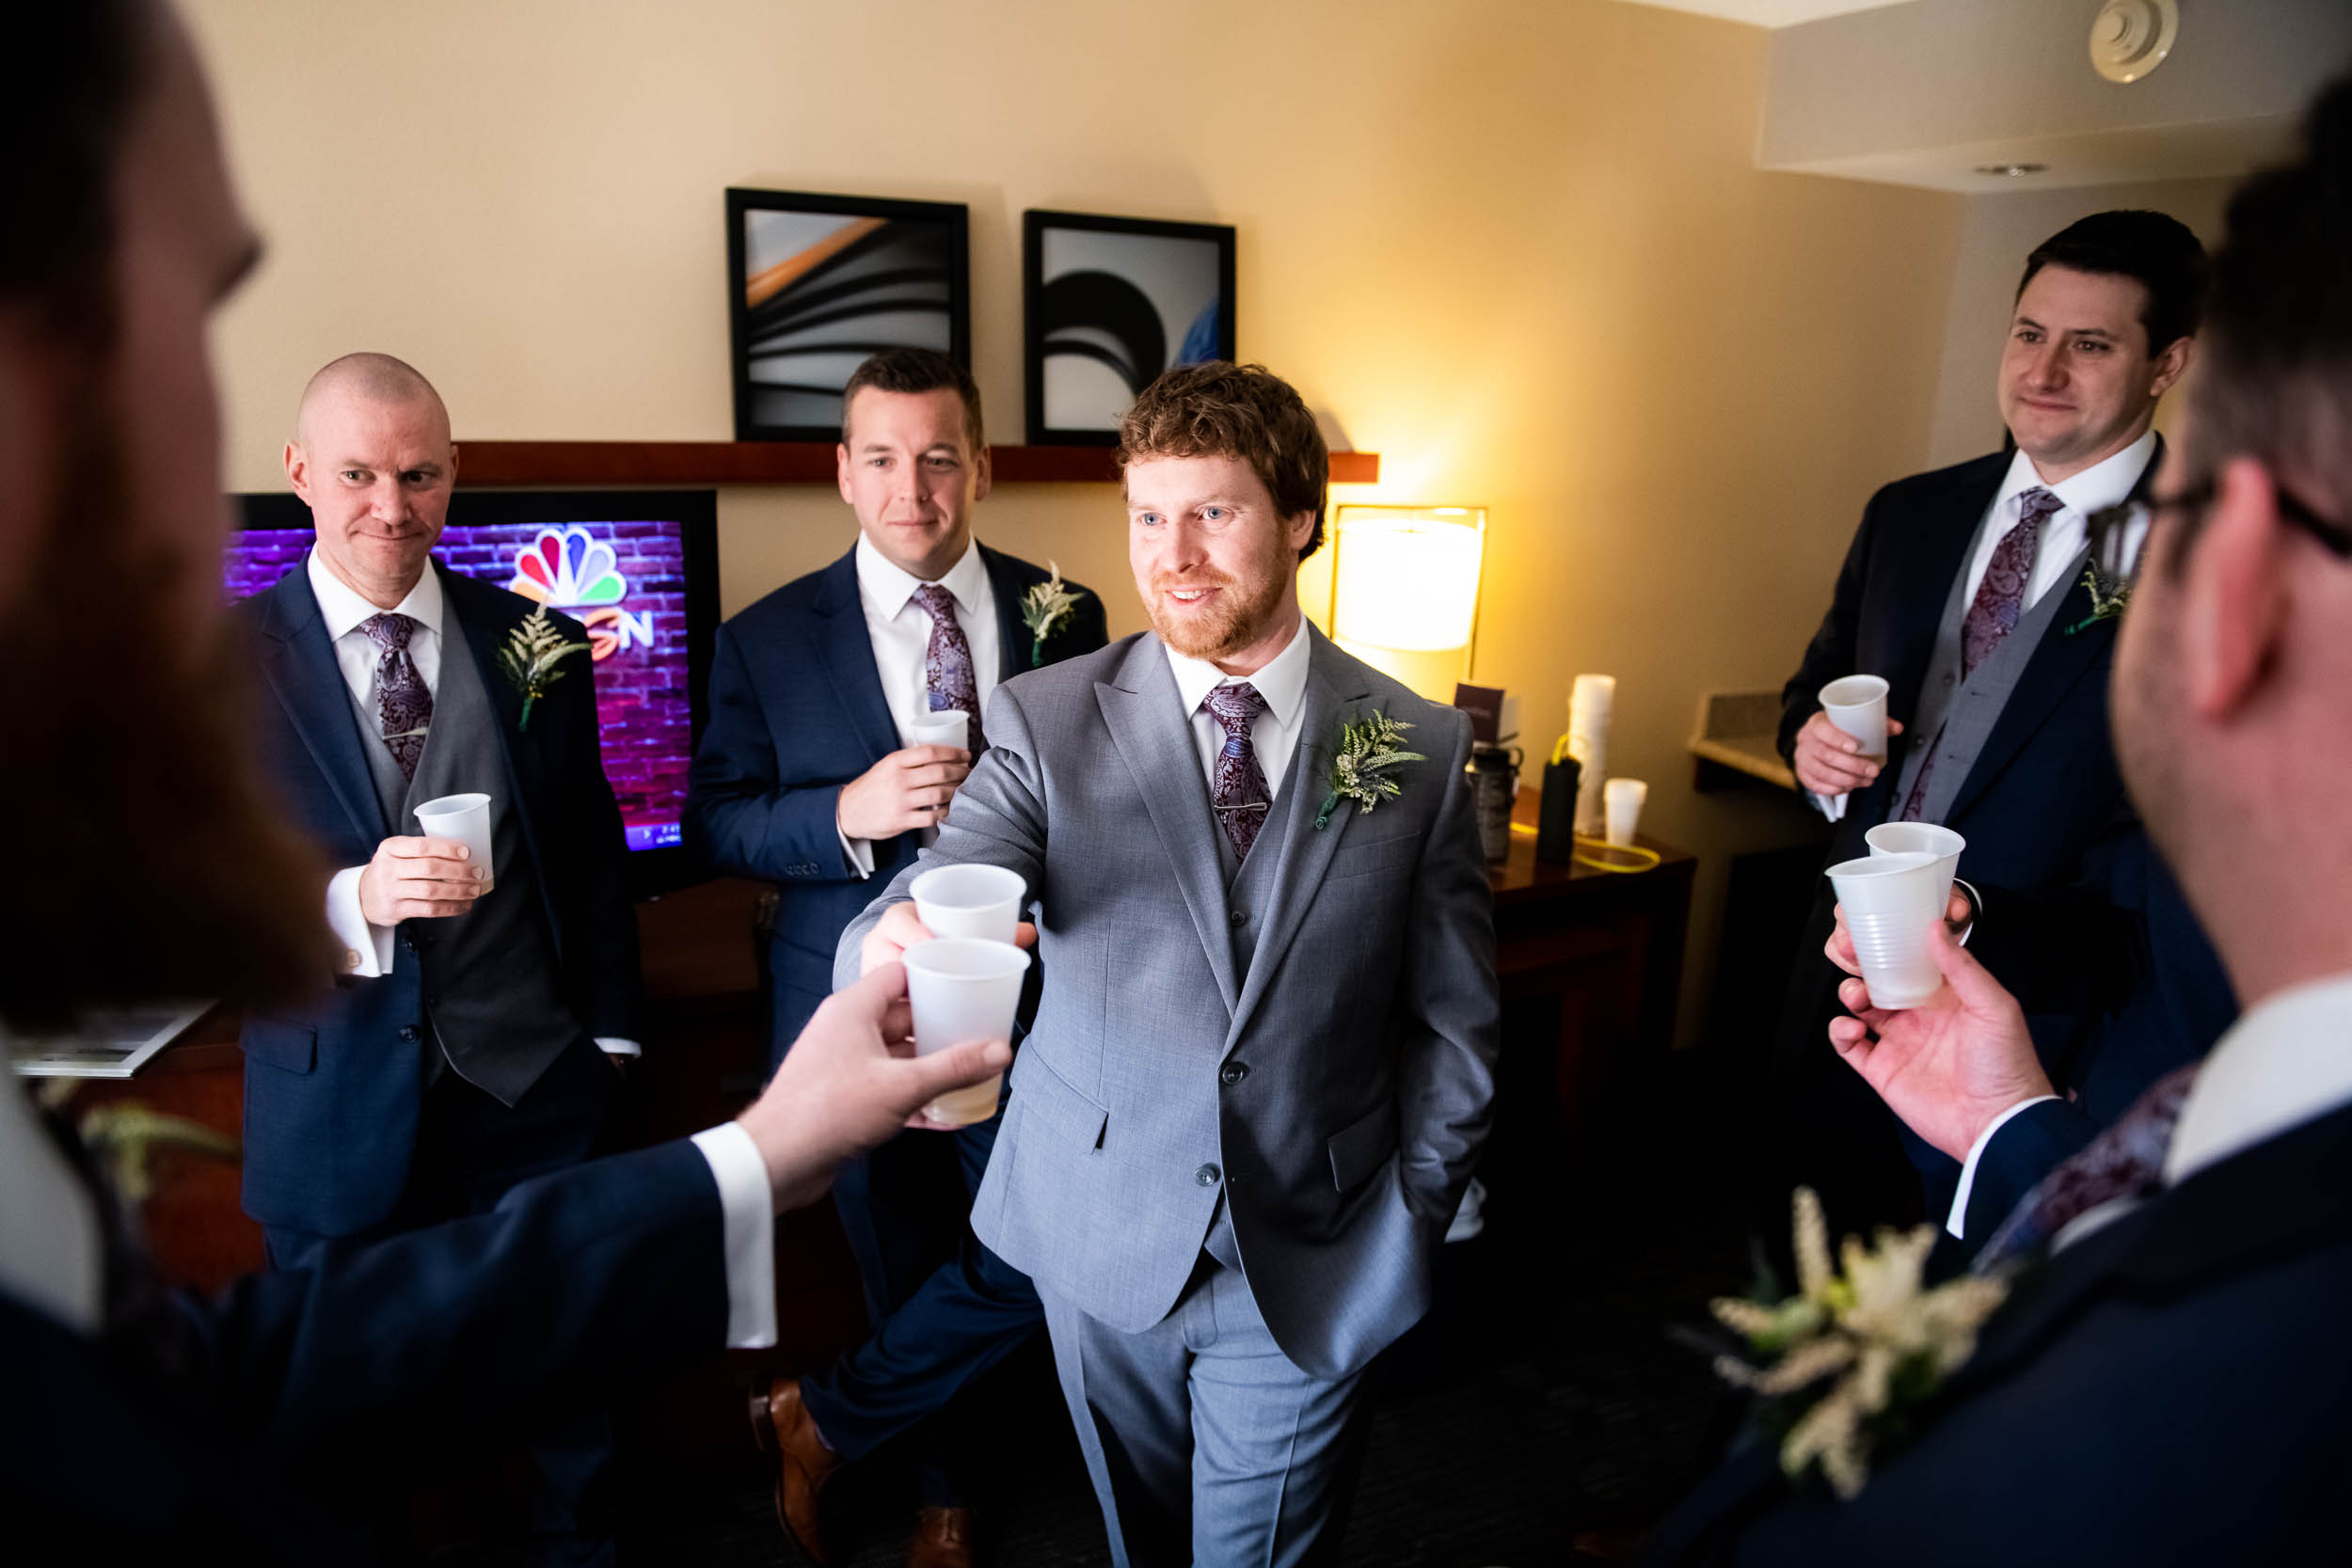 Groomsmen Toast: Modern industrial Chicago wedding inside Prairie Street Brewhouse captured by J. Brown Photography. Find more wedding ideas at jbrownphotography.com!